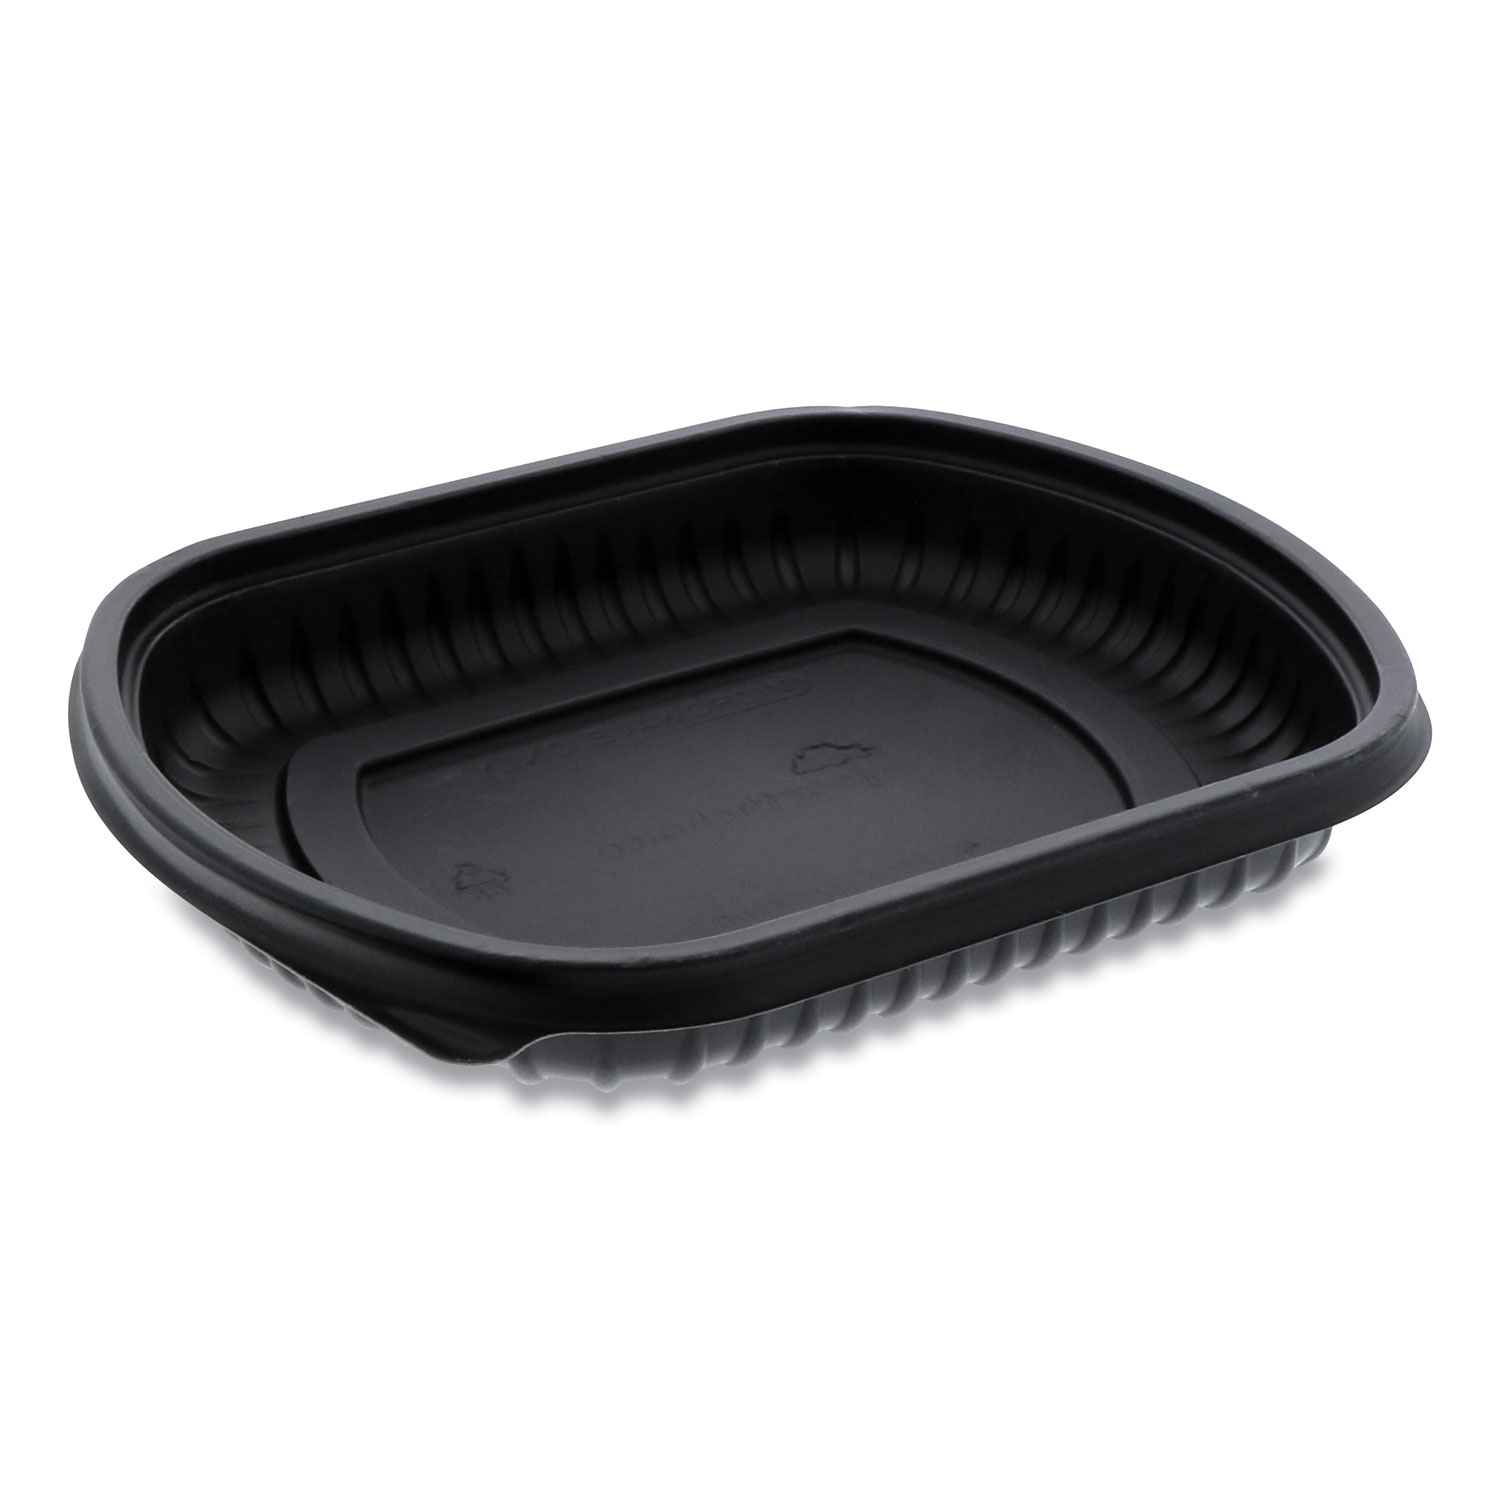 Pactiv EarthChoice ClearView MealMaster Container, 16 oz, 8.13 x 6.5 x 1, 1-Compartment, Black, 252/Carton